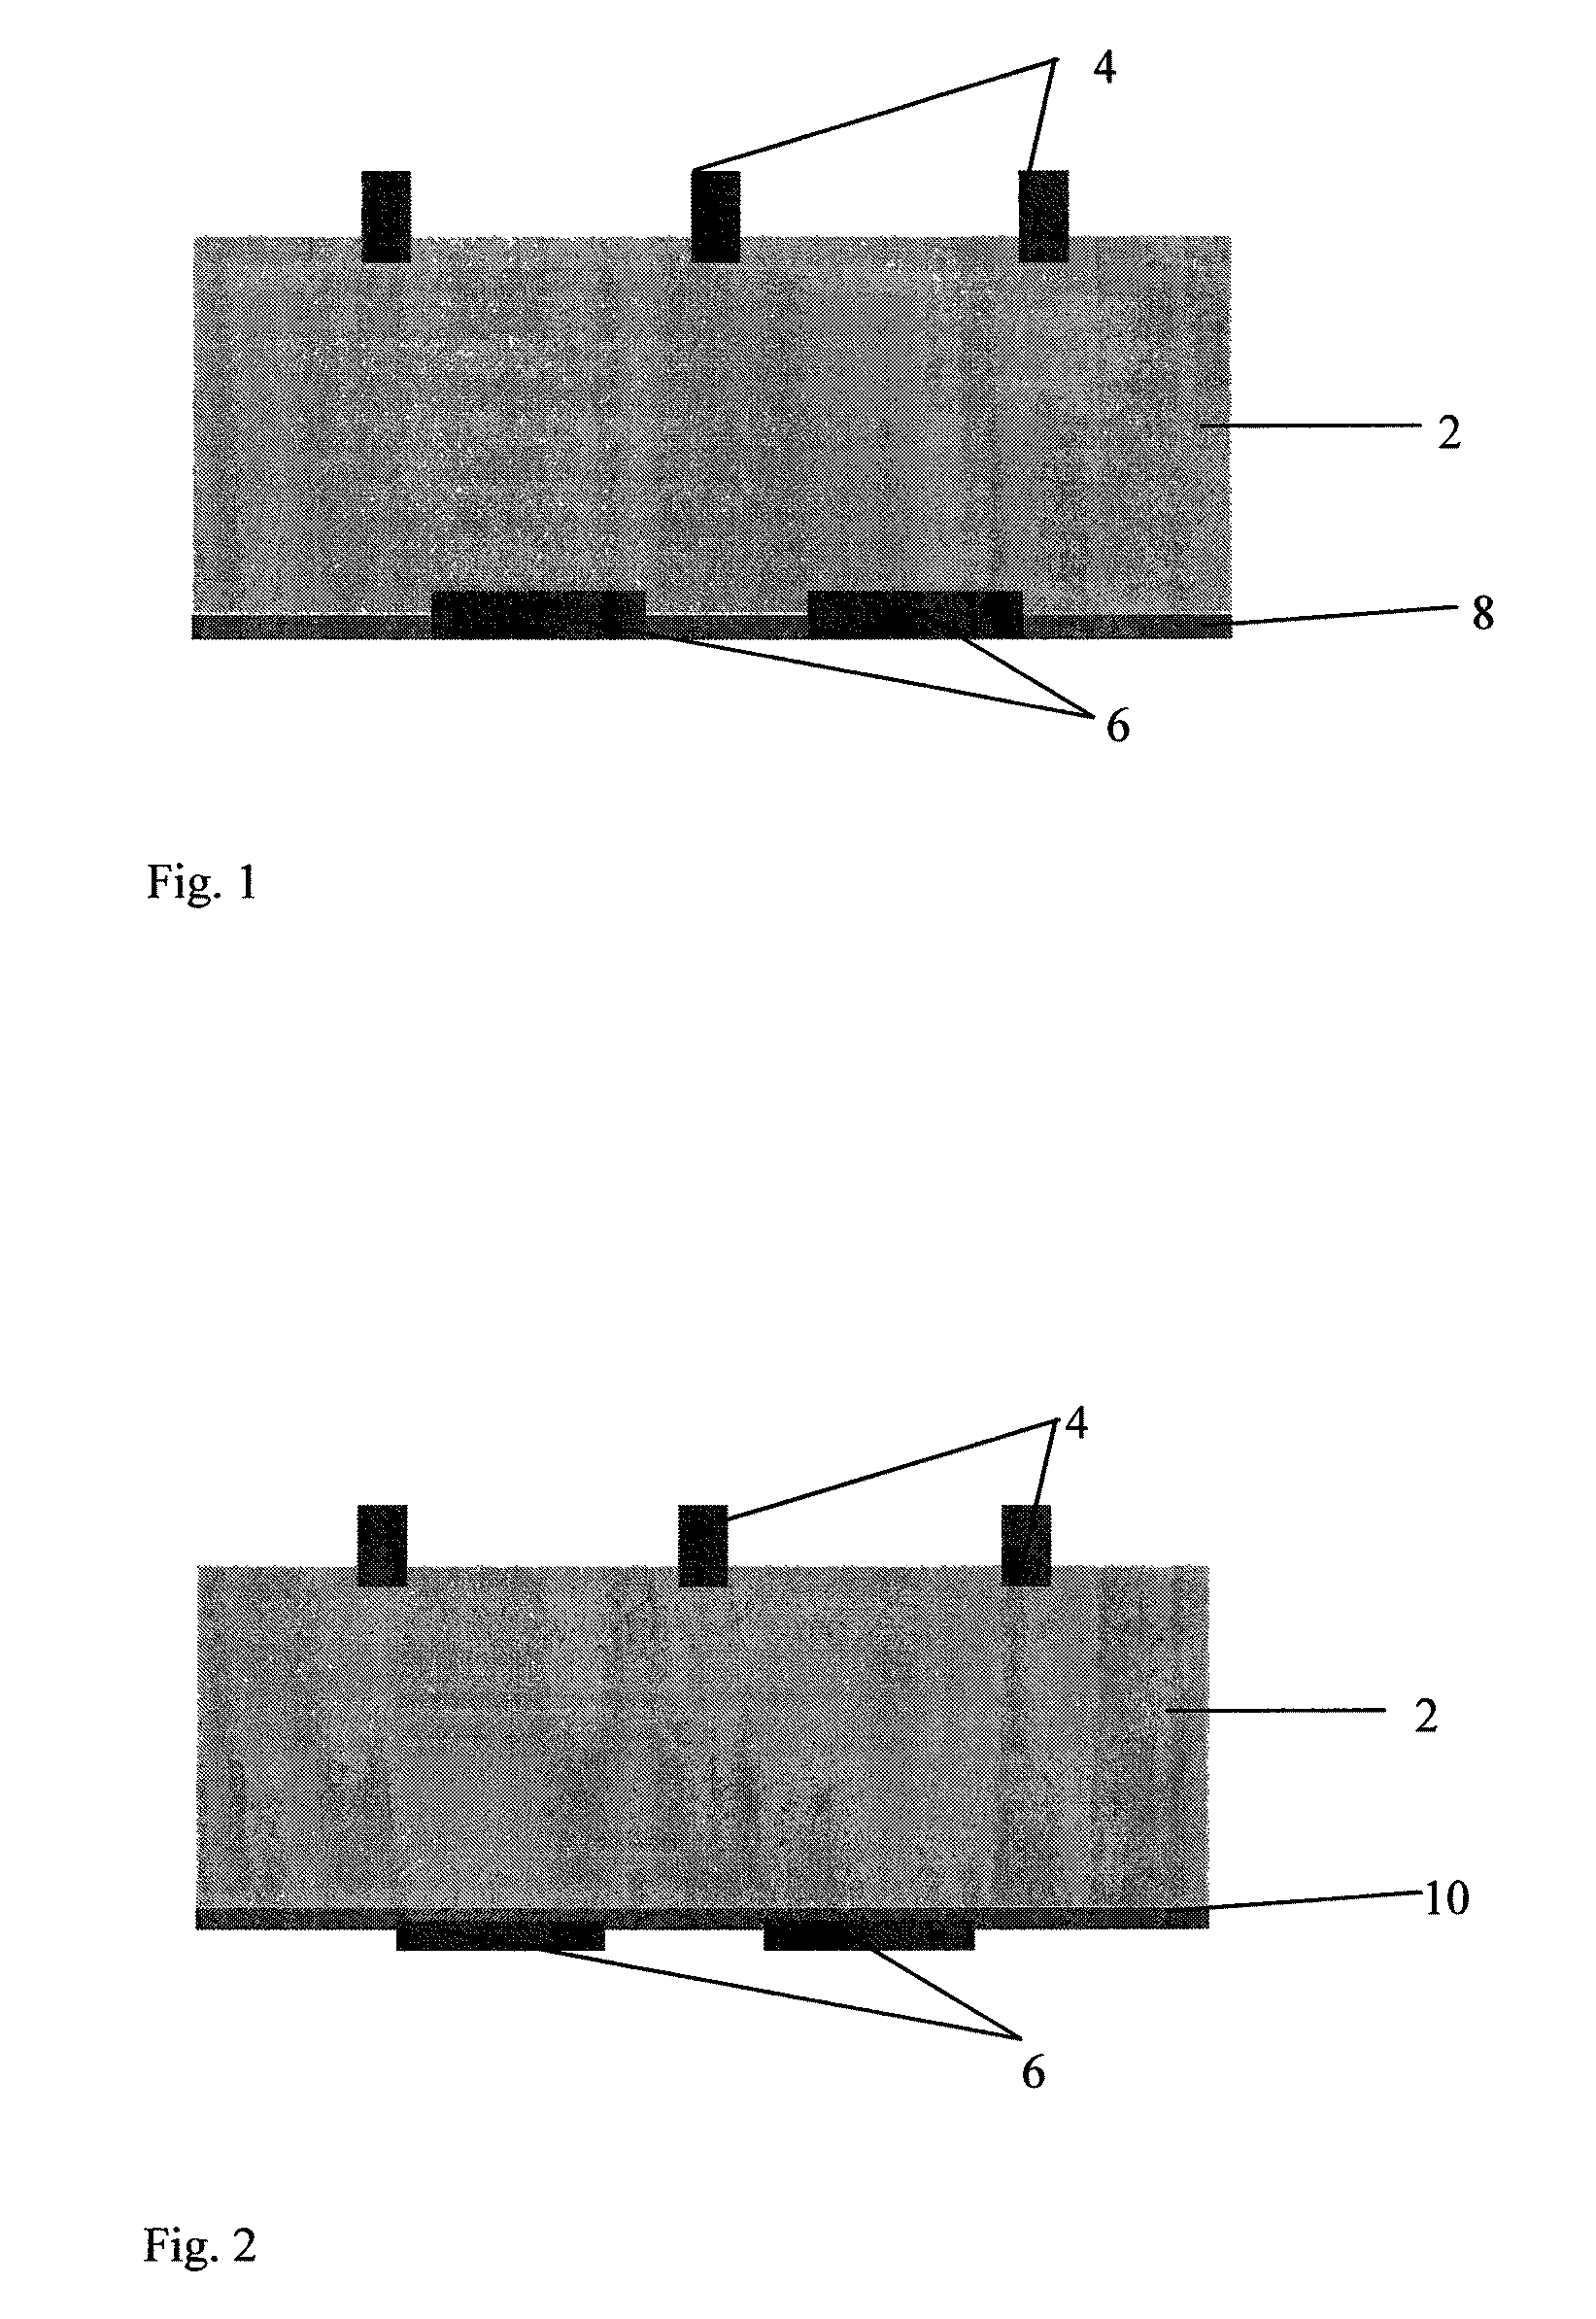 Method for applying full back surface field and silver busbar to solar cell